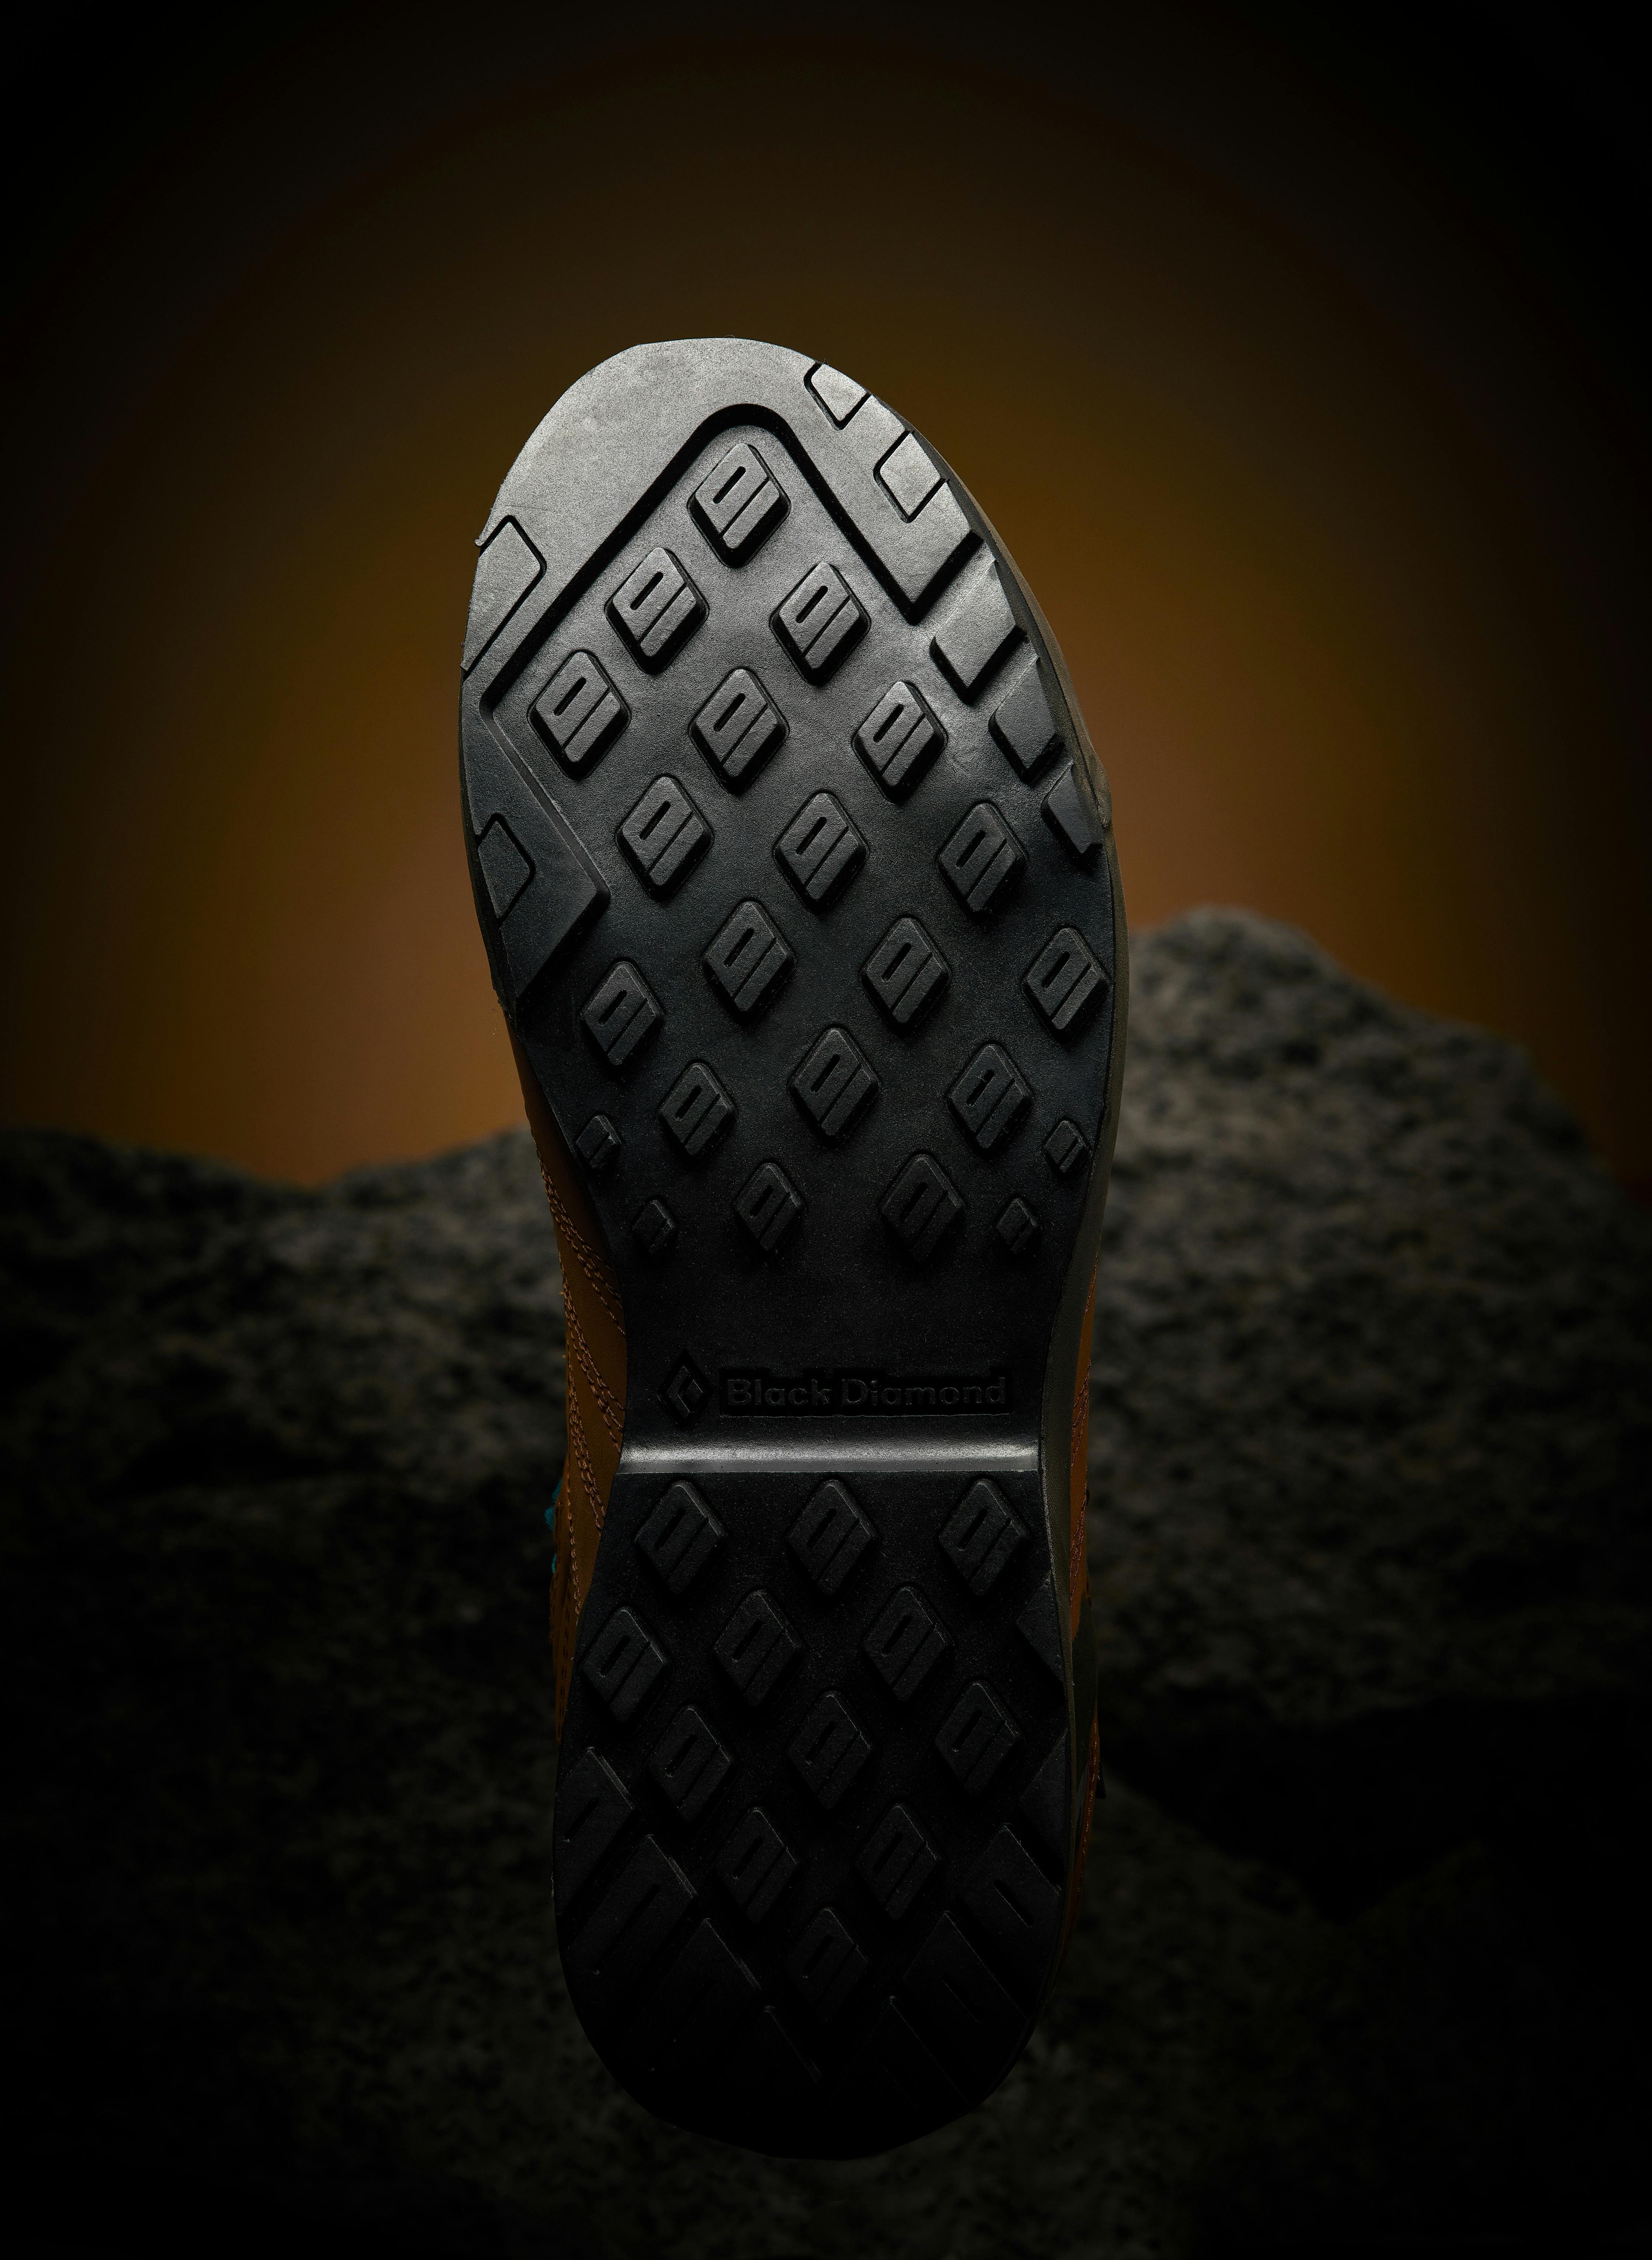 A glam of the bottom of the Mission Leather Approach Shoe.